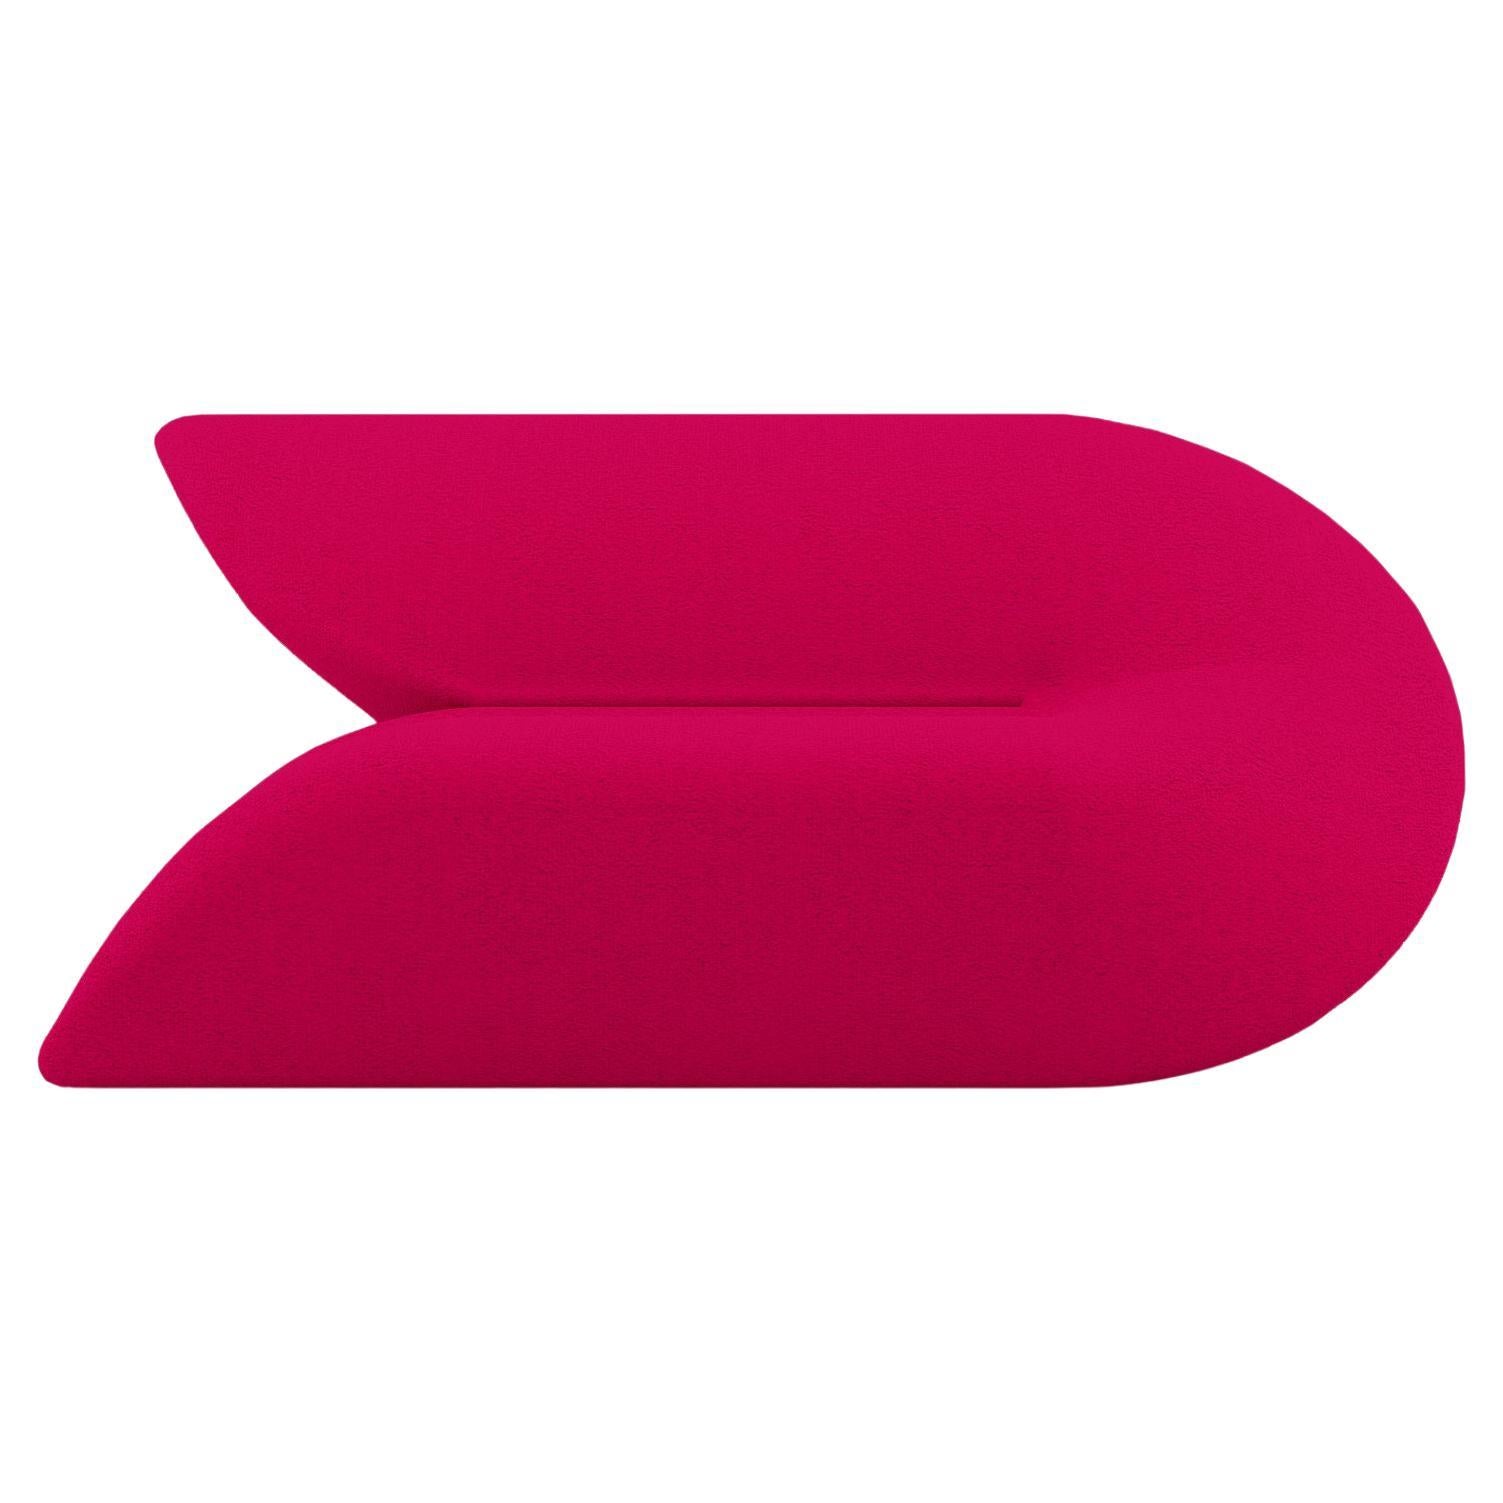 Delta Sofa - Modern Raspberry Red Upholstered Two Seat Sofa For Sale